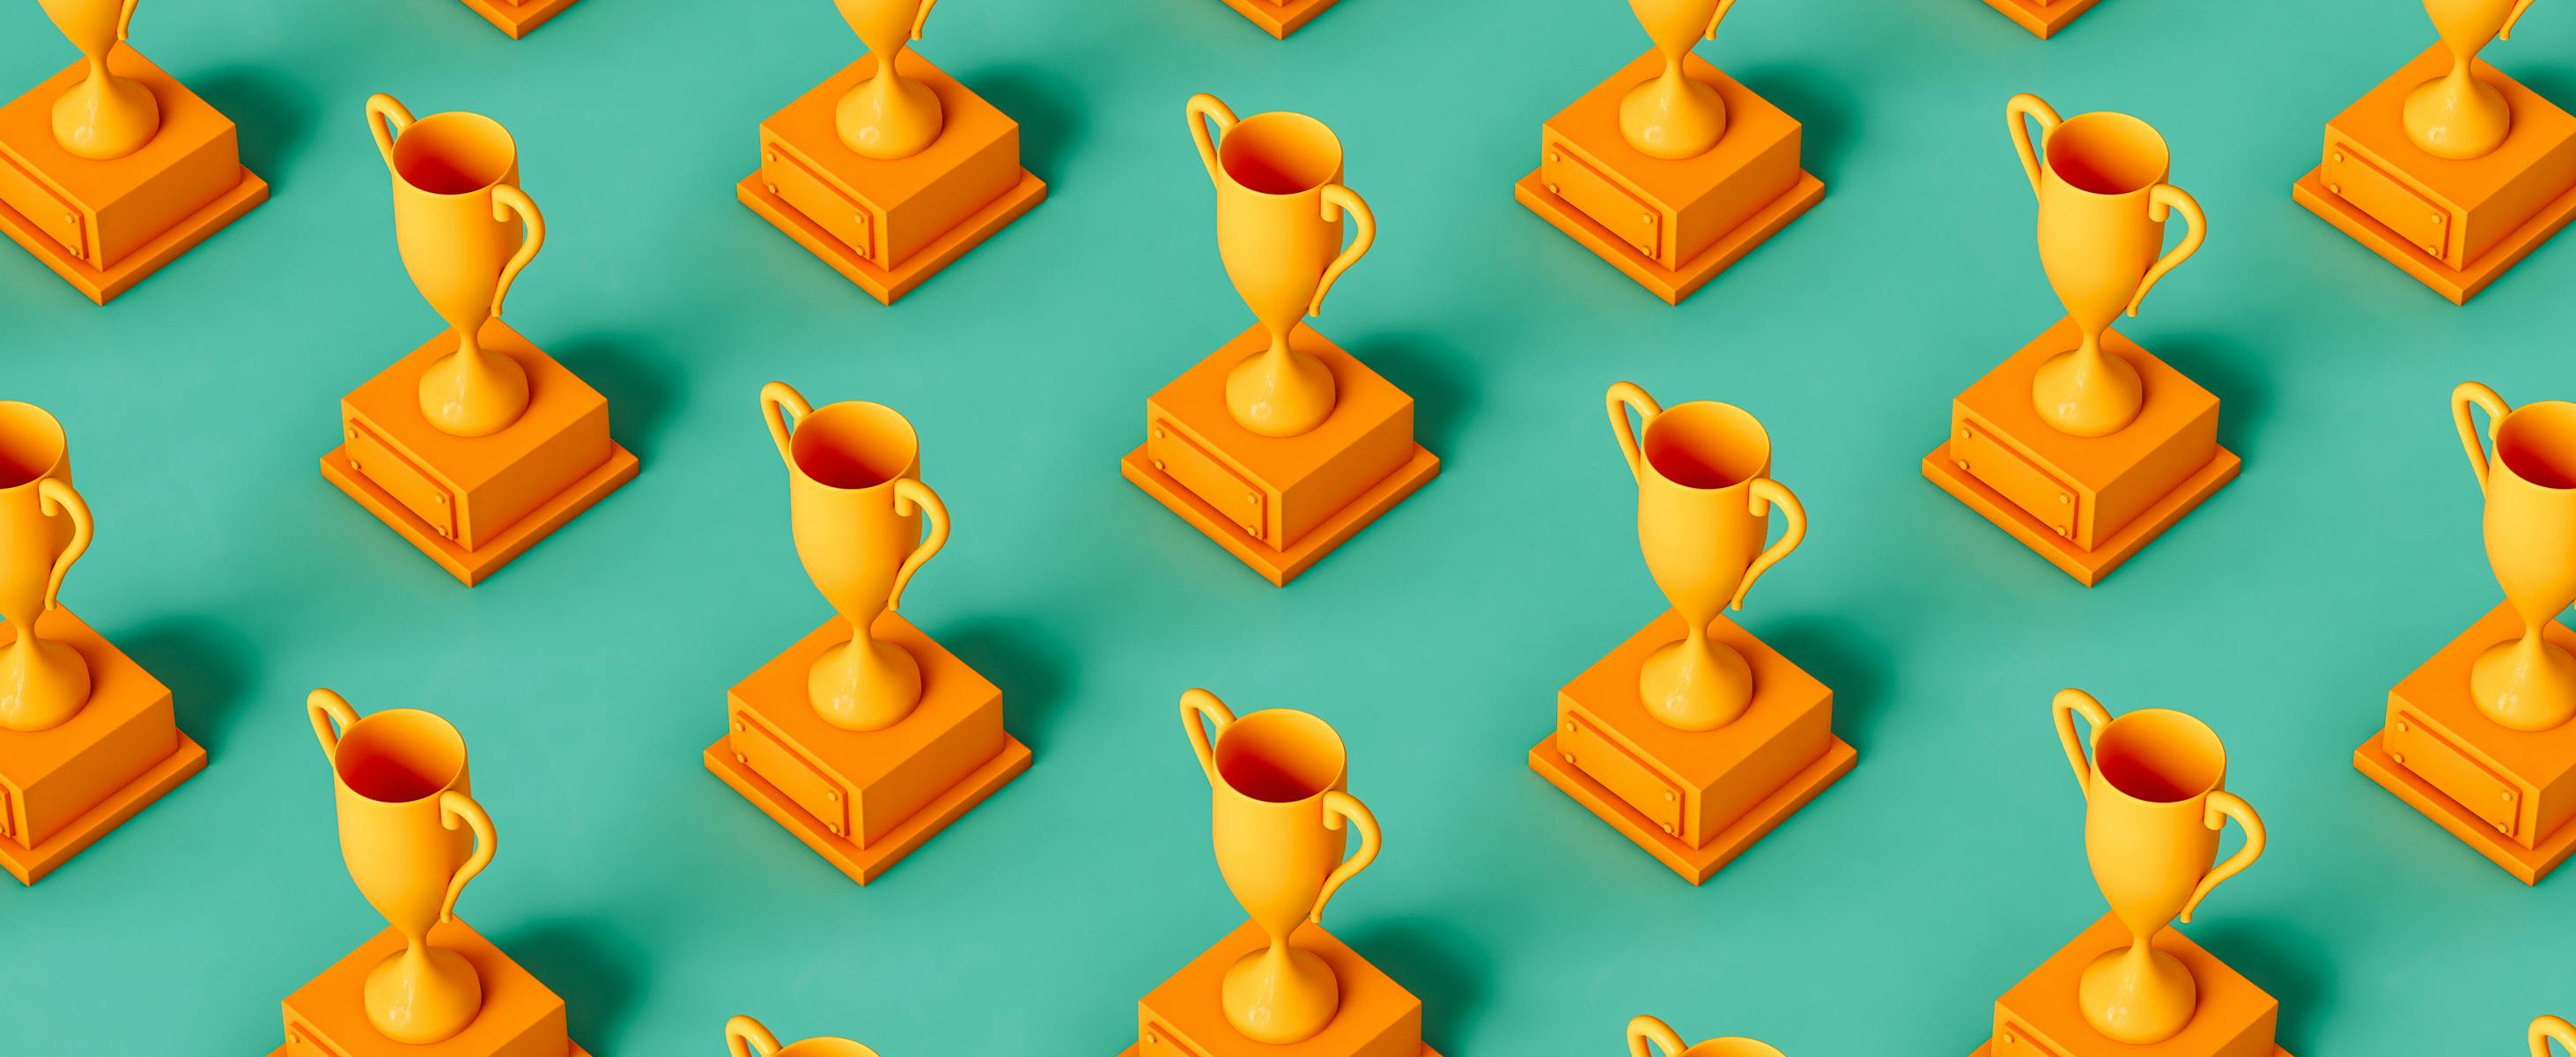 Multiple yellow trophies in even rows on a turquoise background